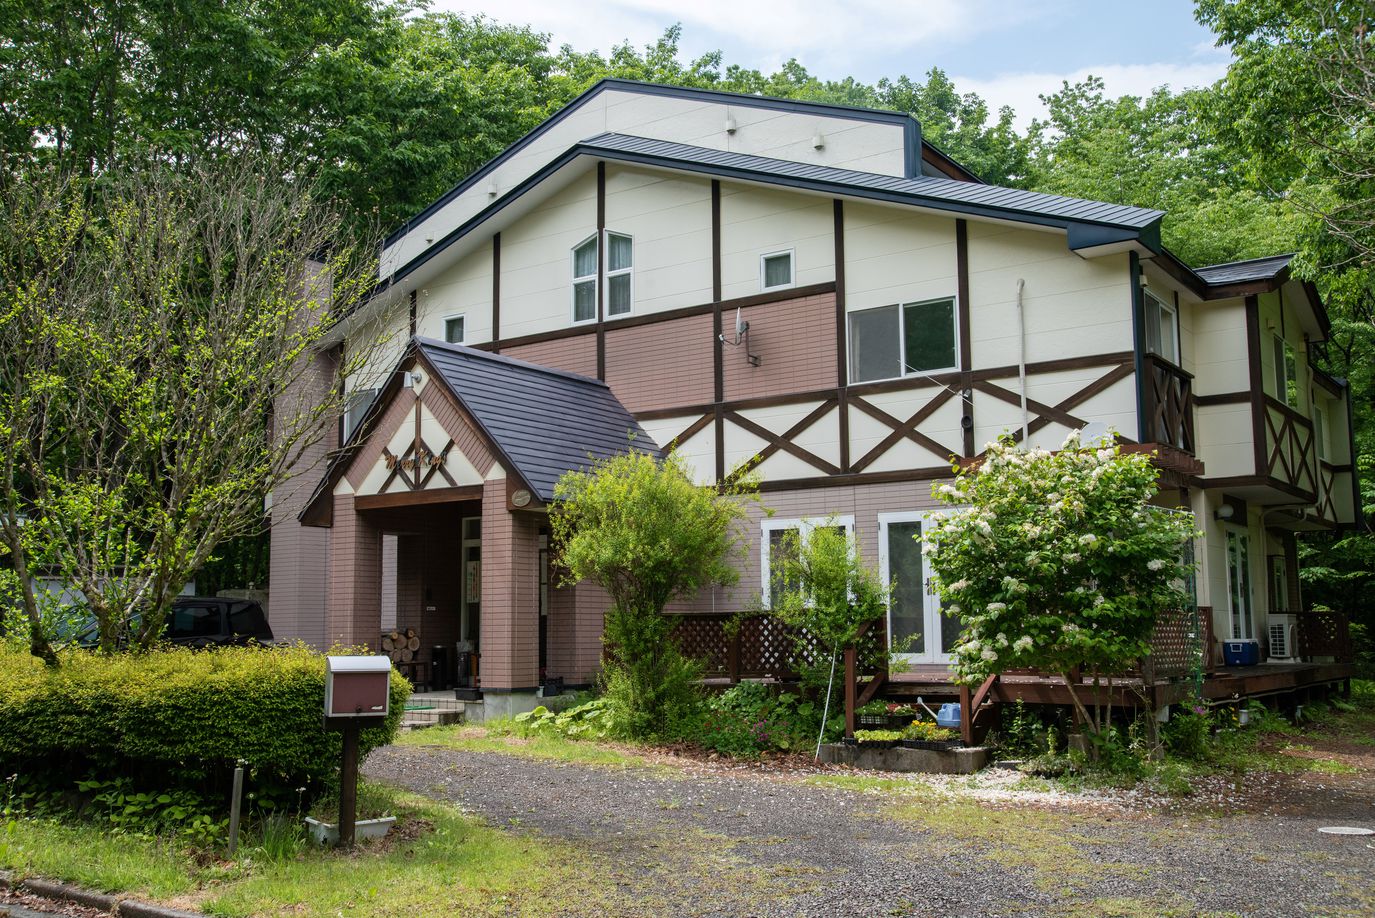 Onsen Pension Mary King's